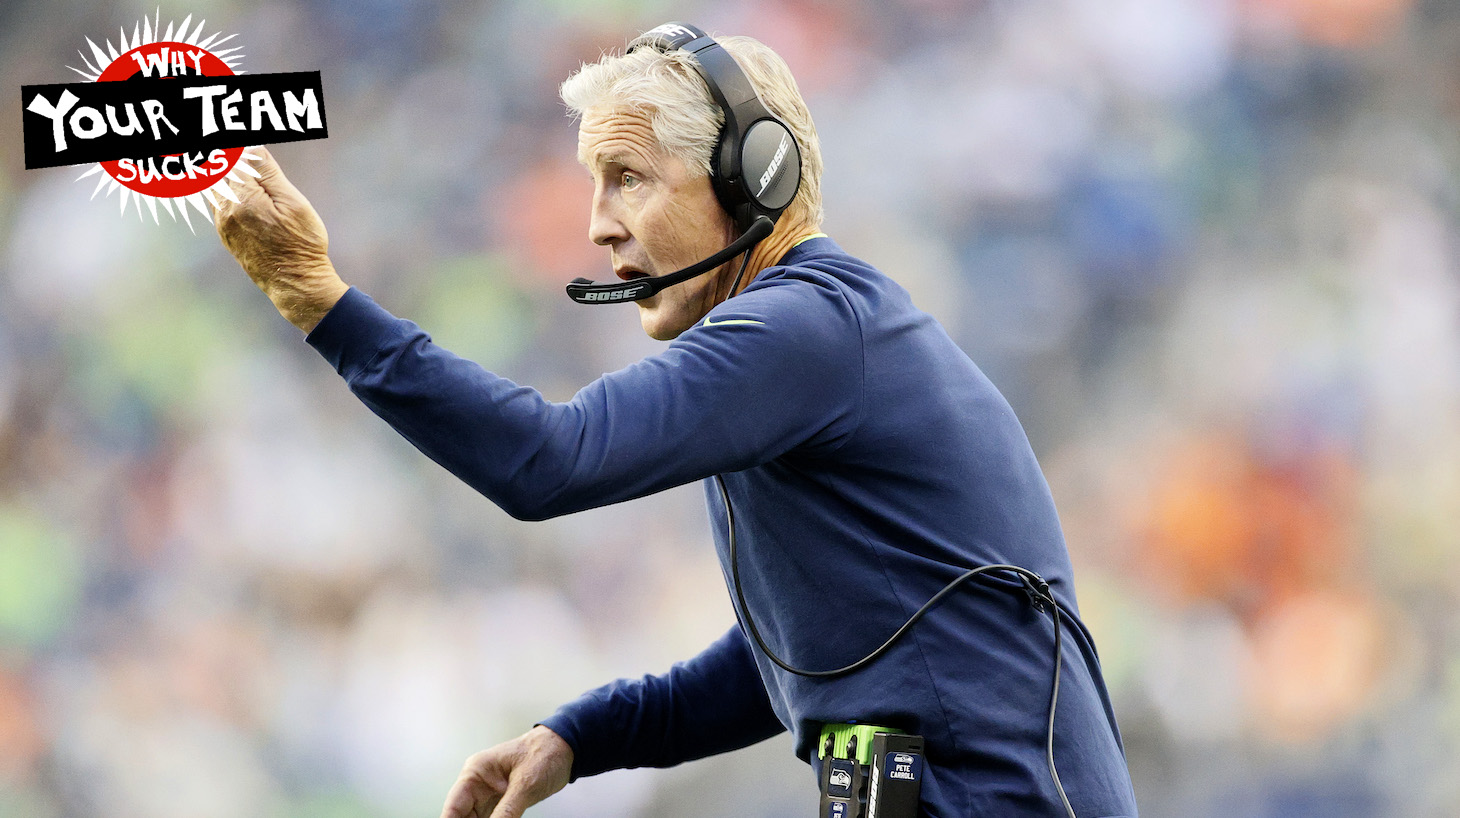 SEATTLE, WASHINGTON - AUGUST 21: Head coach Pete Carroll of the Seattle Seahawks reacts in the first quarter during an NFL preseason game against the Denver Broncos at Lumen Field on August 21, 2021 in Seattle, Washington. The Denver Broncos beat the Seattle Seahawks 30-3. (Photo by Steph Chambers/Getty Images)